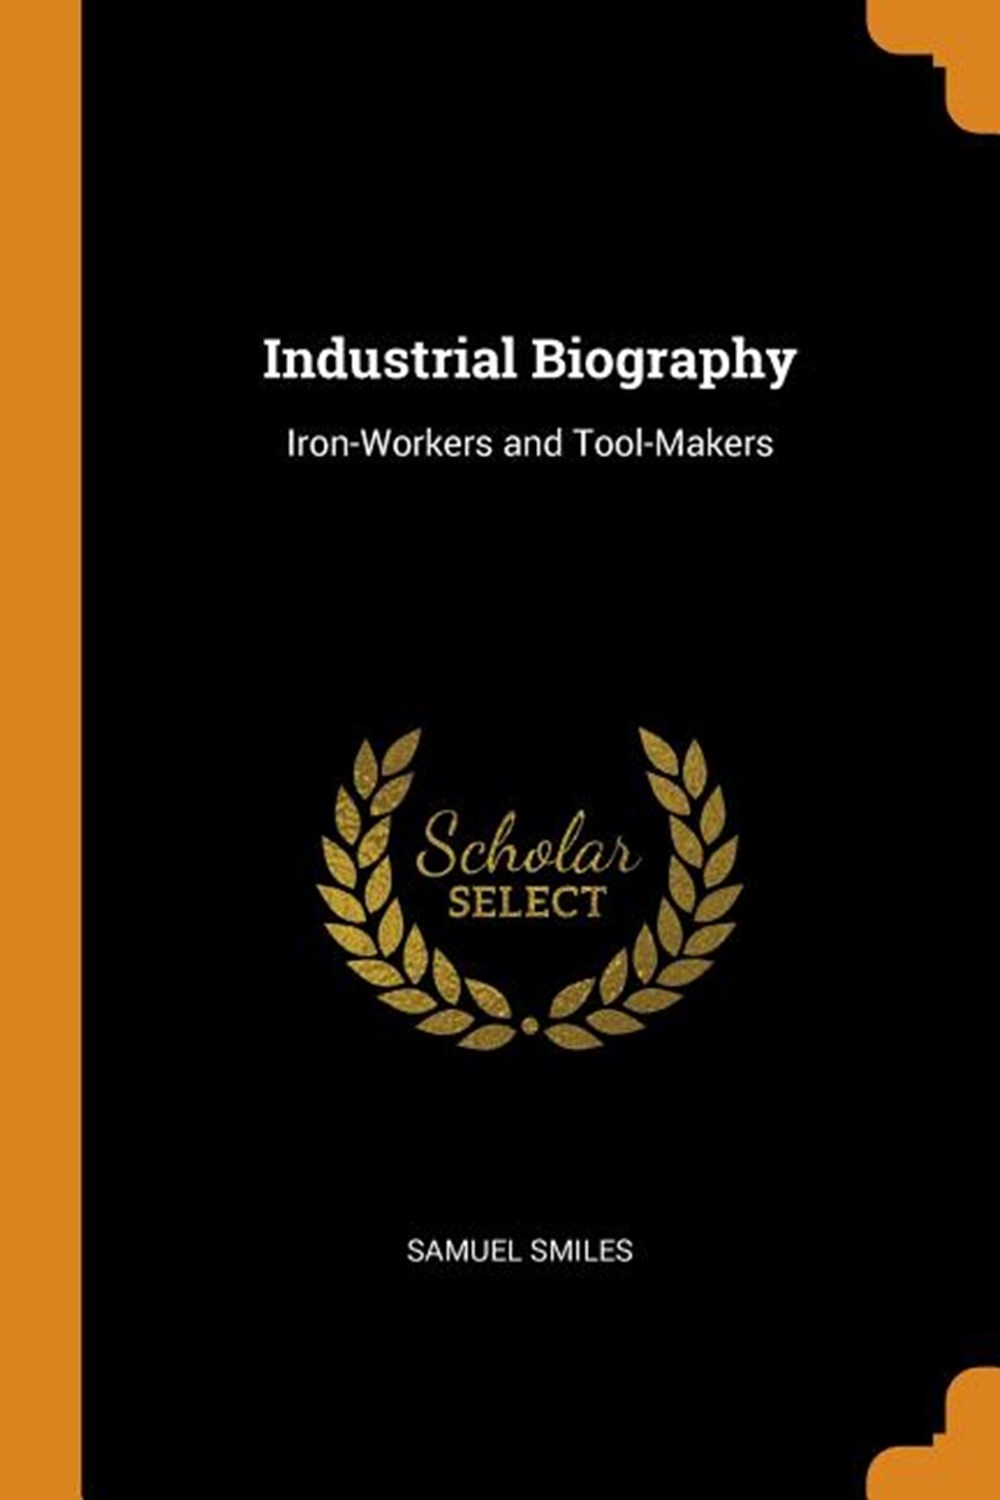 Industrial Biography: Iron-Workers and Tool-Makers